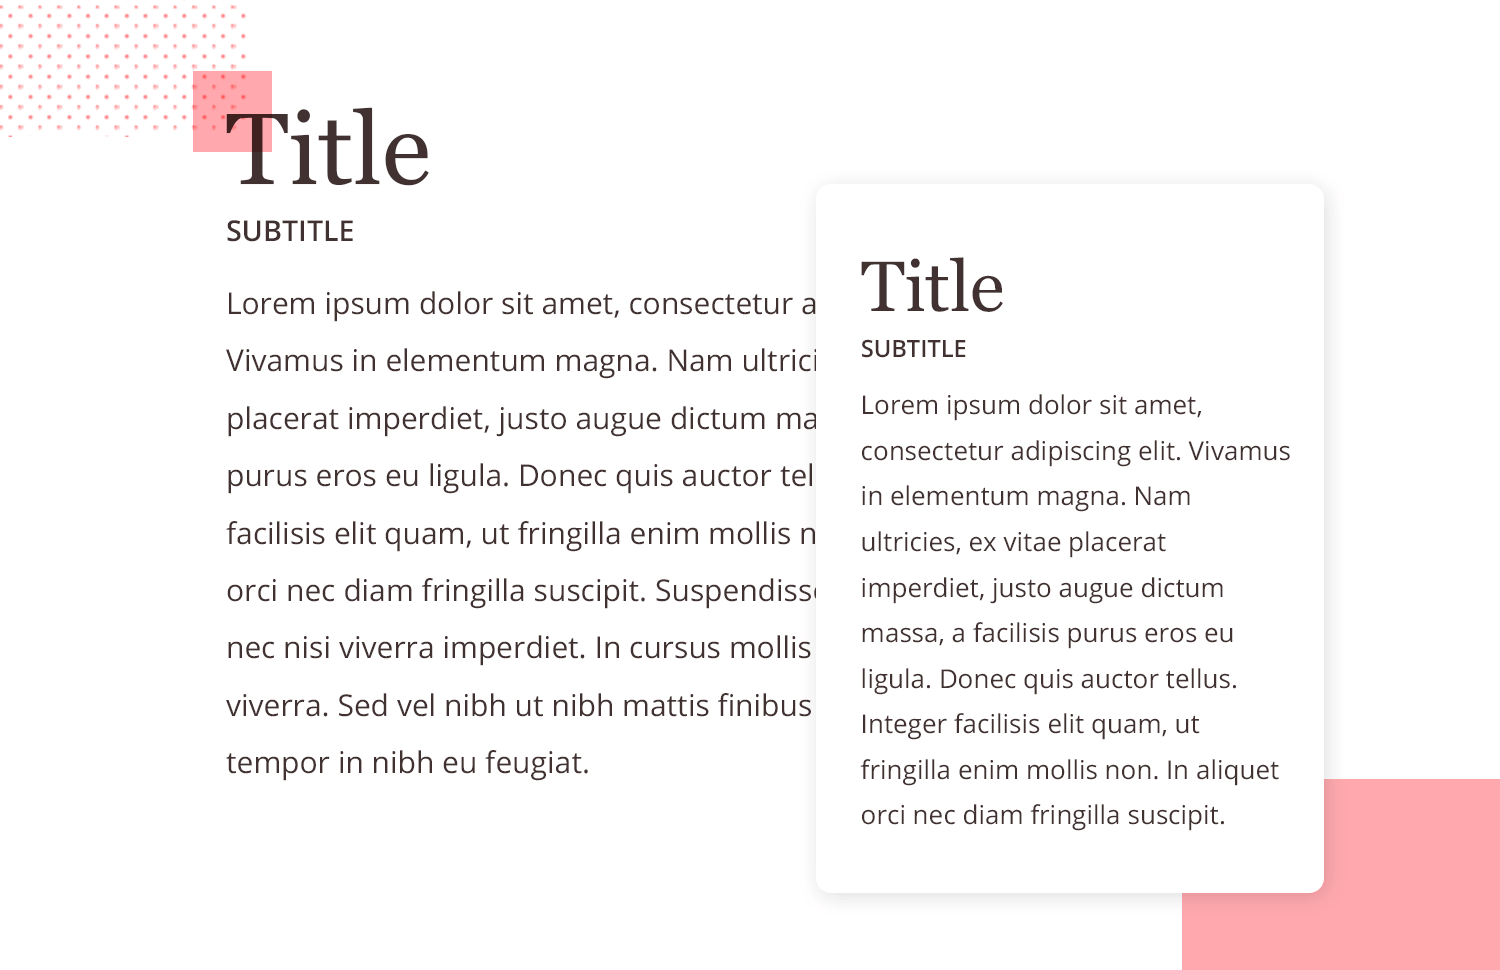 Responsive and fluid fonts improve legibility and readability